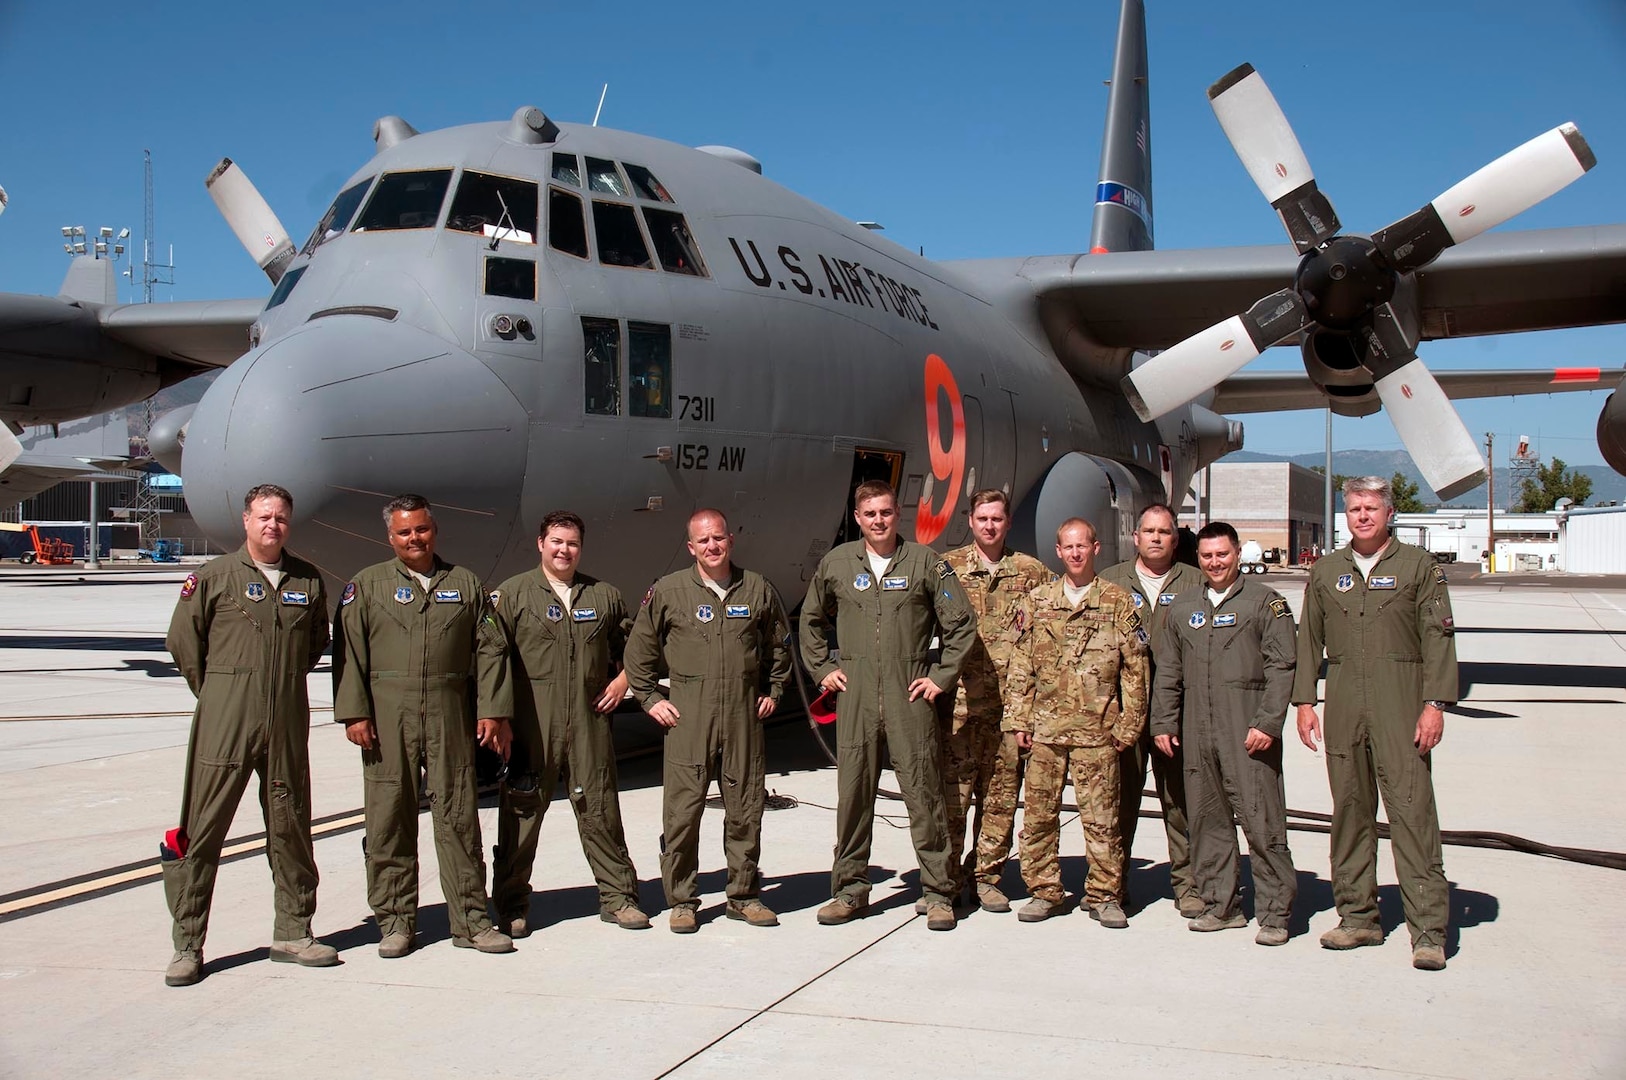 Aircrew with the 152nd Airlift Wing, Nevada Air National Guard, pose for a photo before departing Reno to assist federal firefighting agencies at Peterson Air Force Base for the Colorado fires on July 5, 2018.